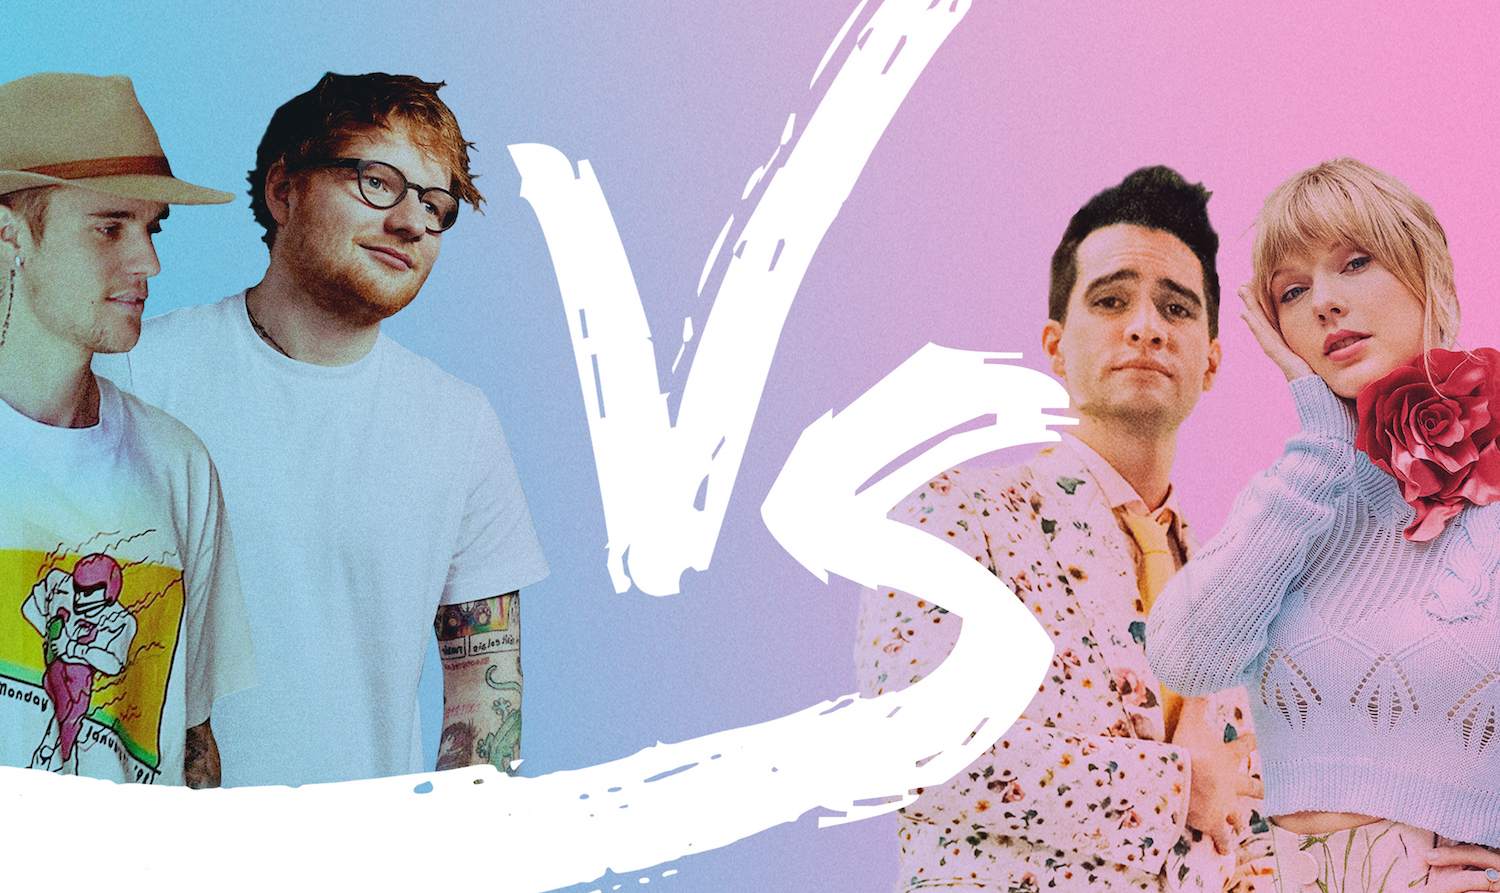 Ed Sheeran & Justin Bieber to join TMN Hot 100 tussle with ‘I Don’t Care’